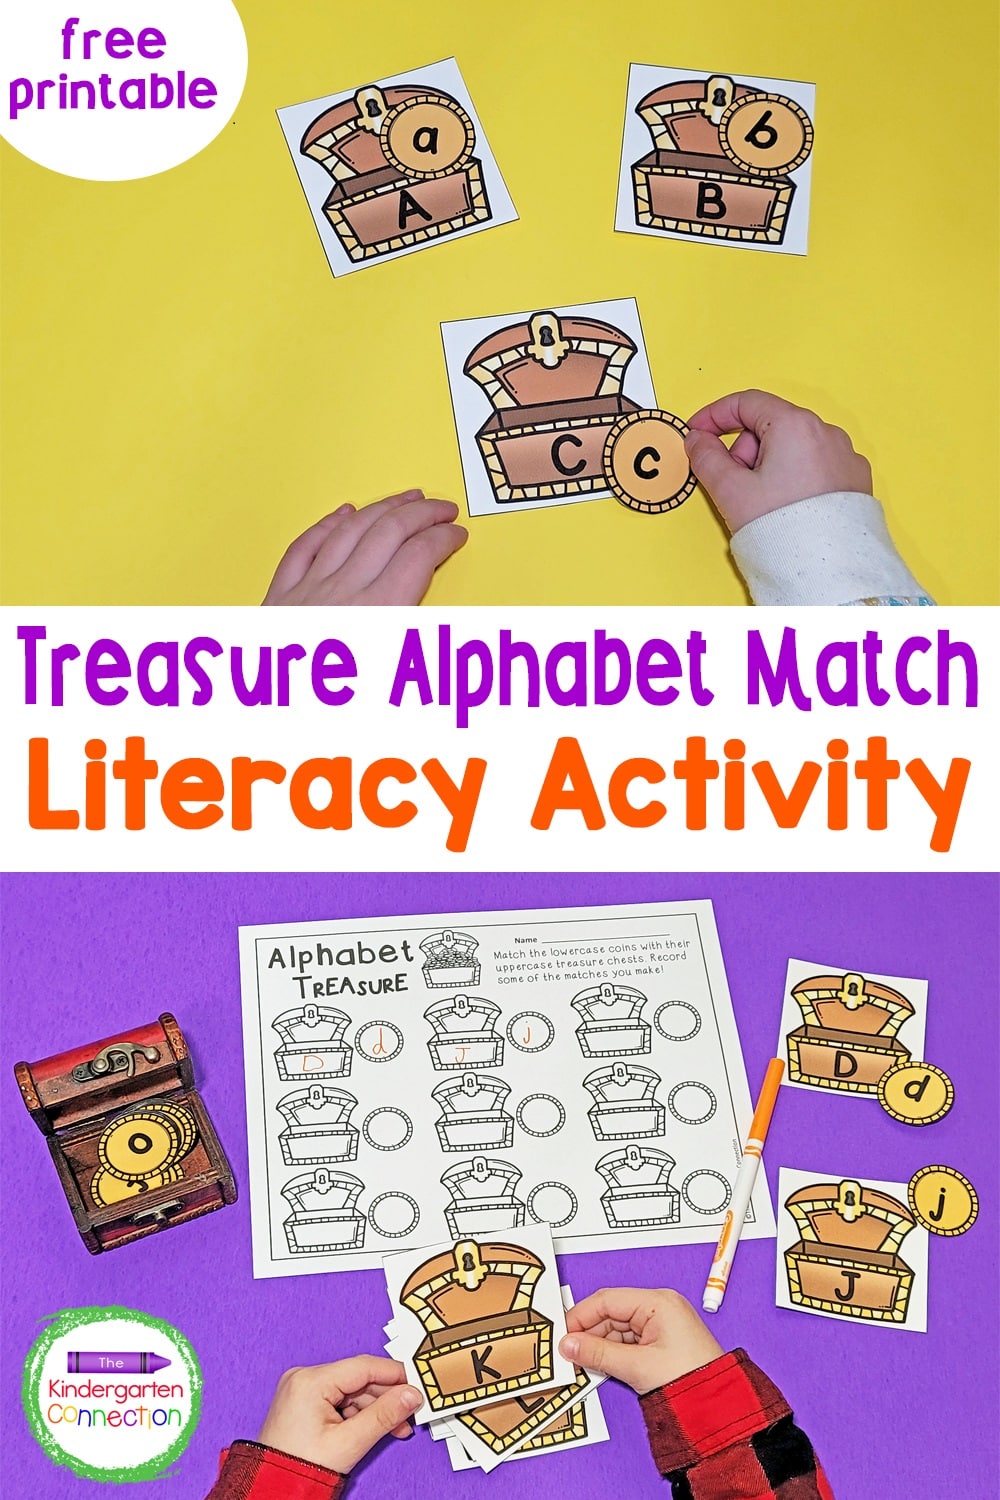 Ready for some pirate-themed fun? Grab this free Treasure Alphabet Match Activity and enjoy matching uppercase and lowercase letters!